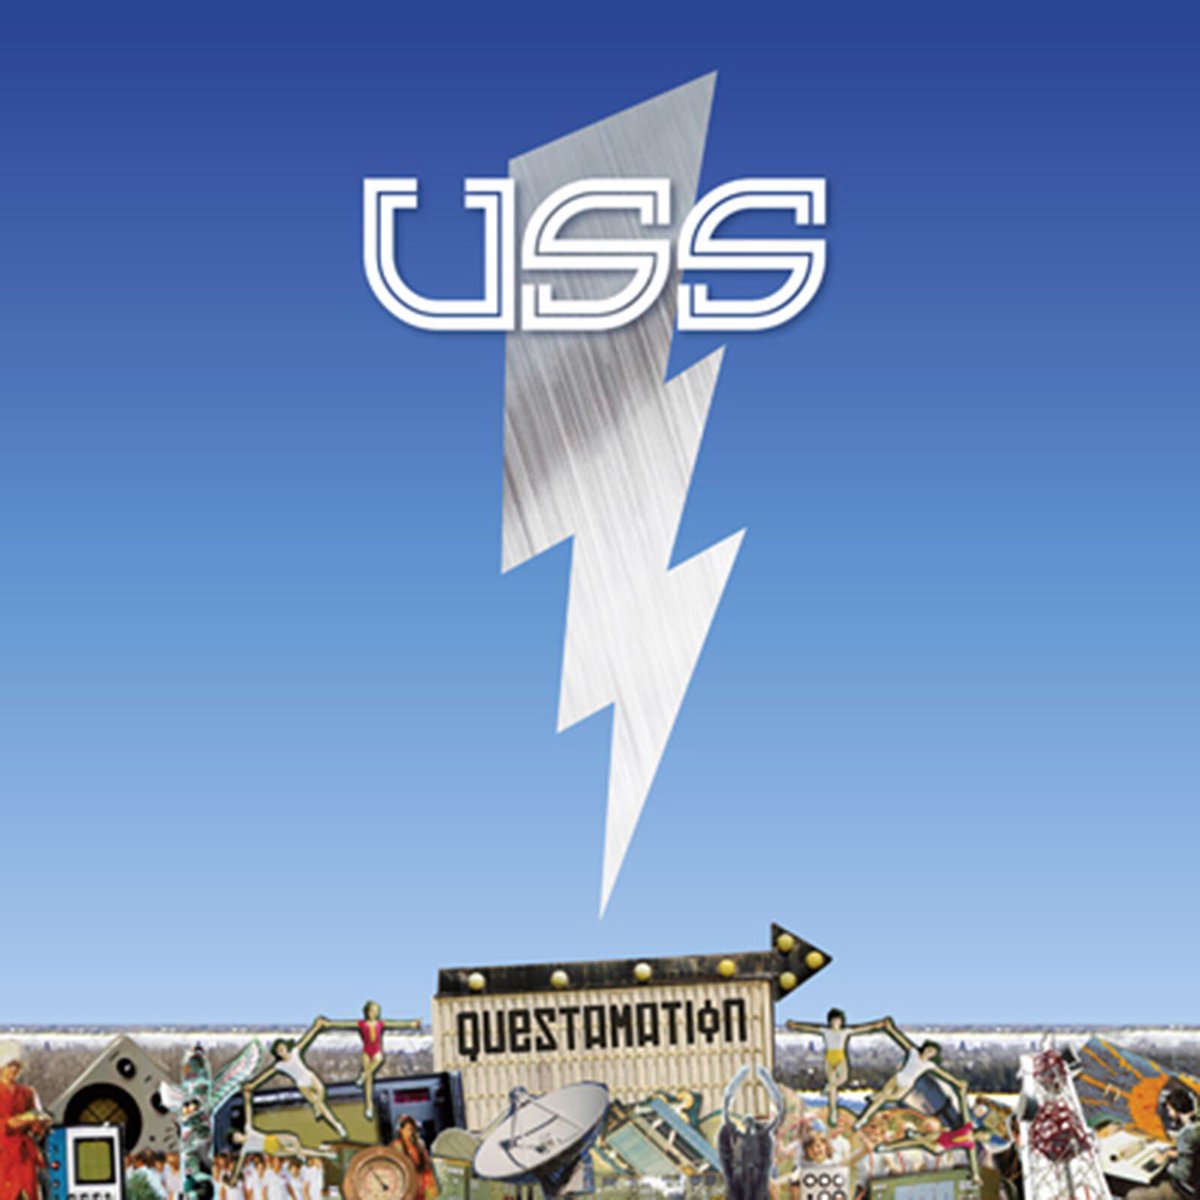 Happy 14th birthday to @USSMUSIC’s first full-length studio album, Questamation! This is my personal favorite album of theirs, featuring singles Laces Out and Anti-Venom.